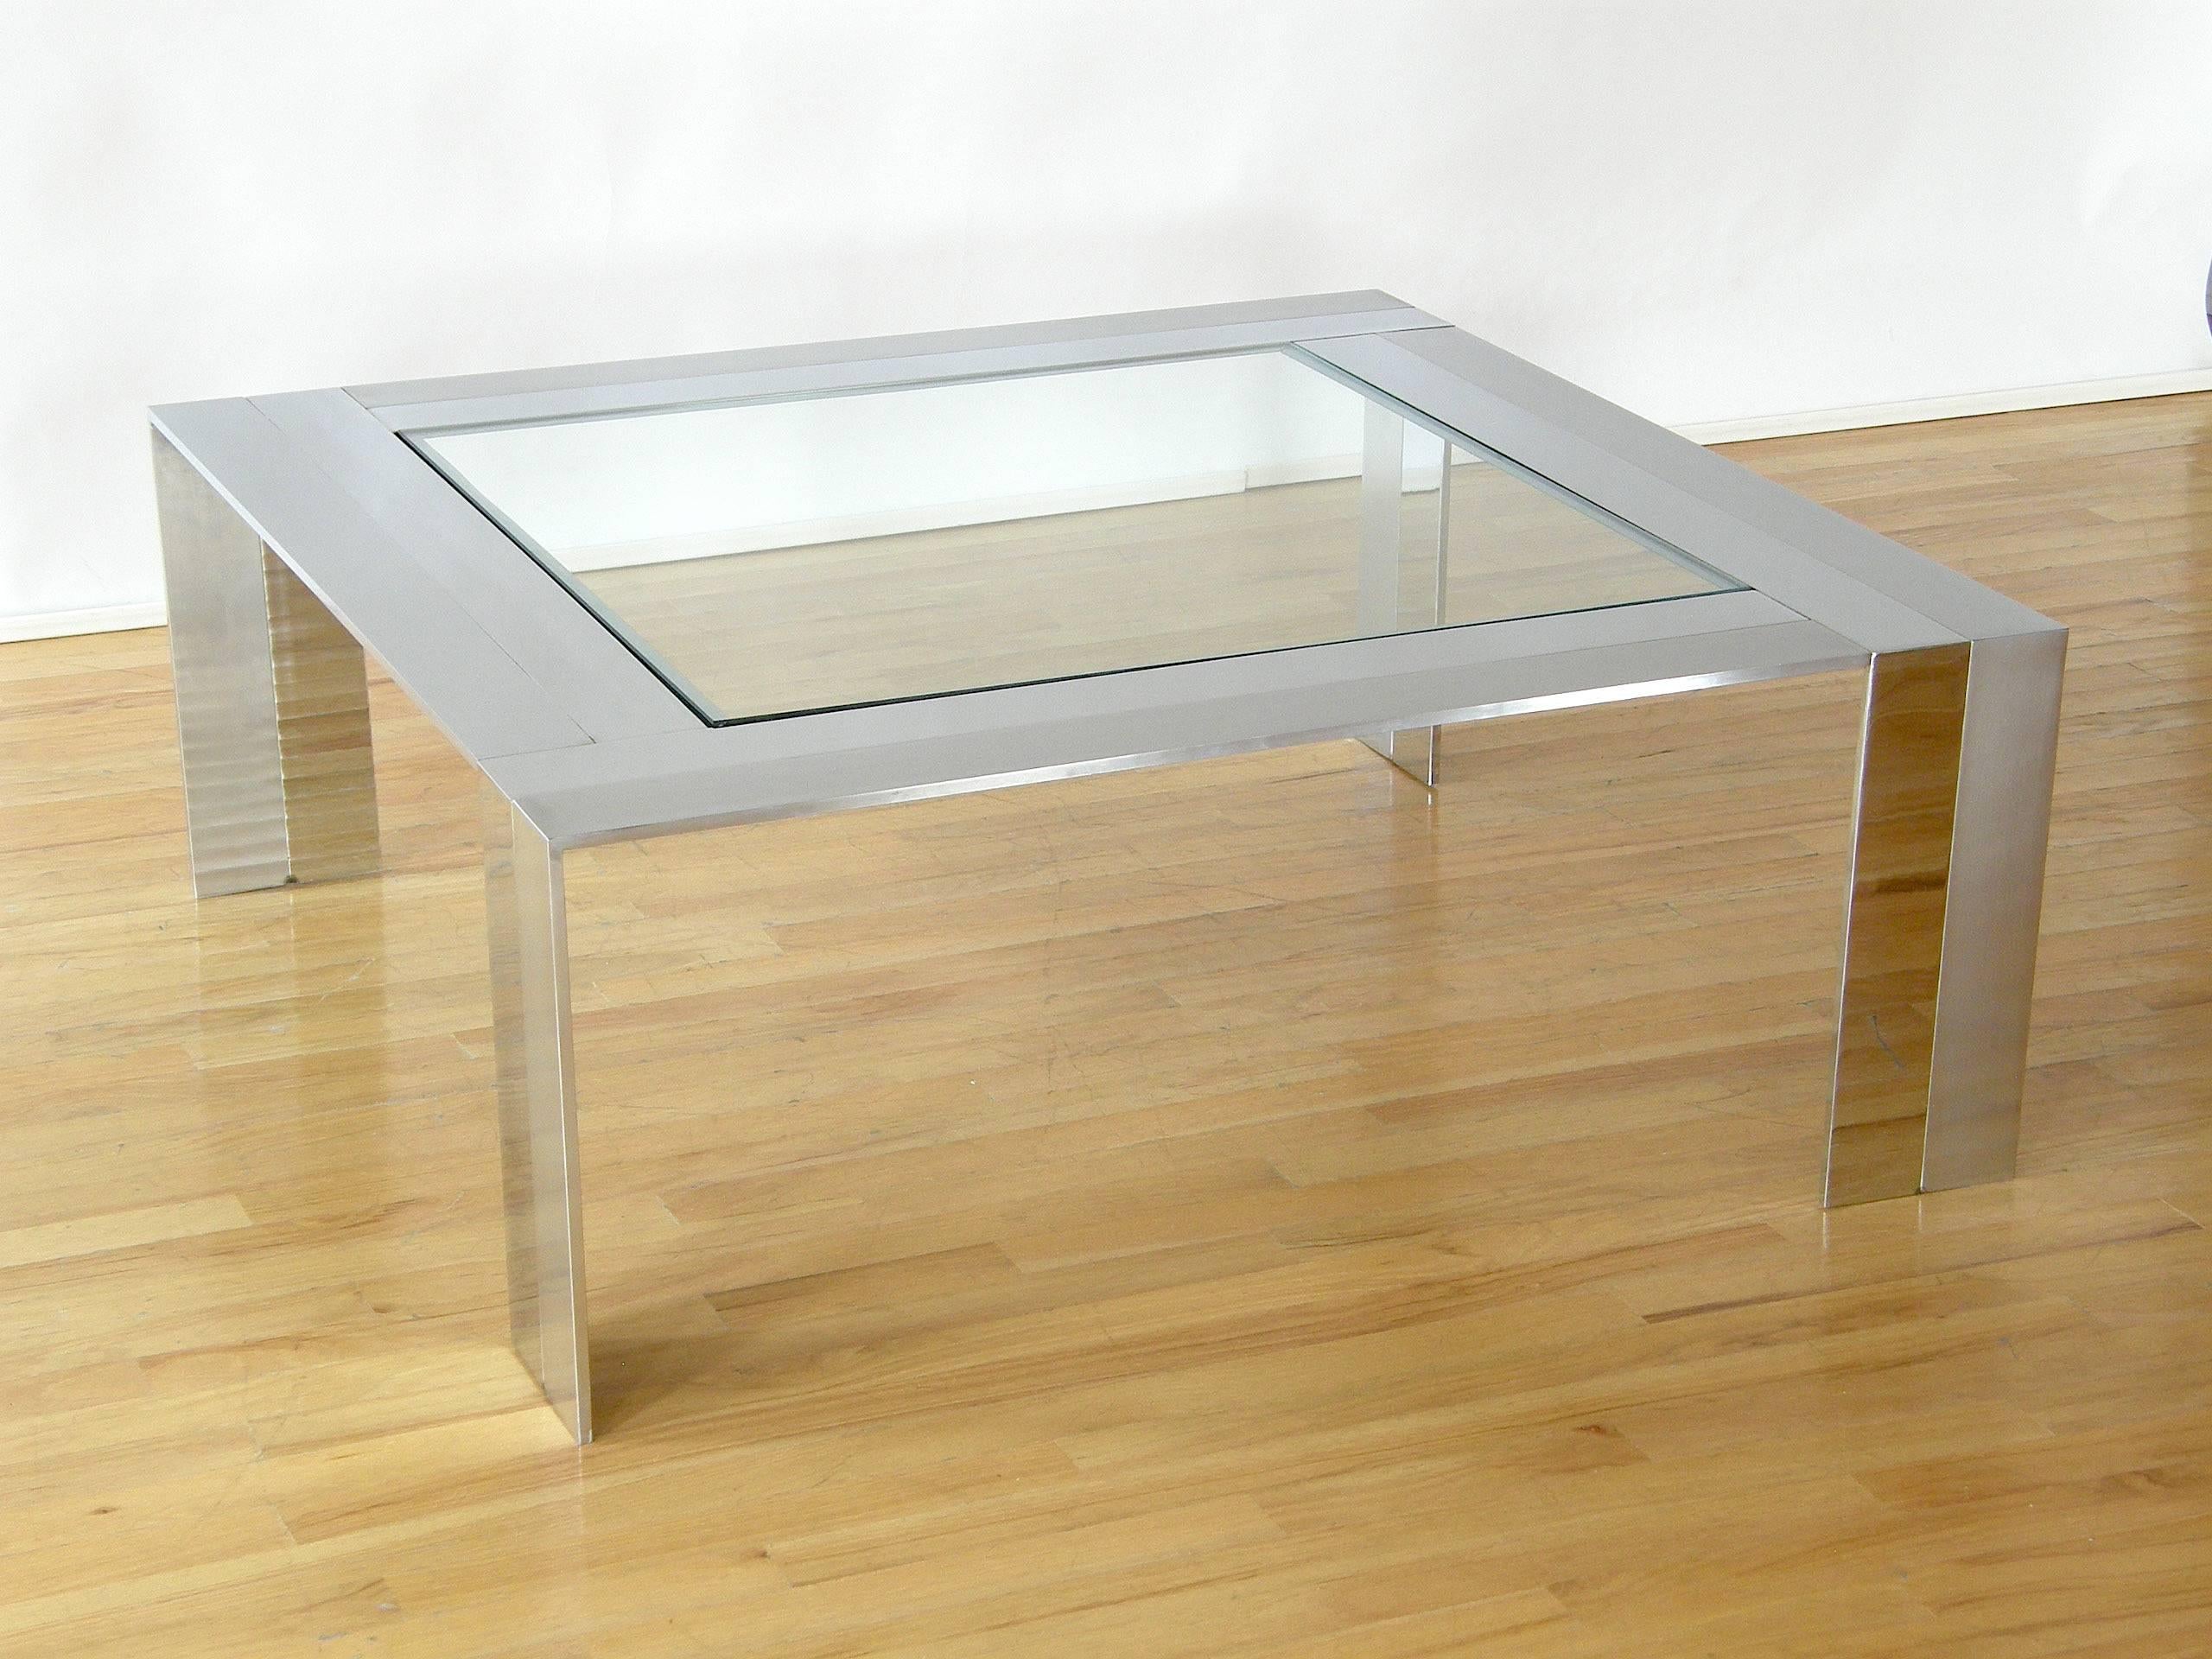 This Minimalist modern coffee or cocktail table has a very refined line. It is beautifully made of thick, polished and brushed stainless steel with clear evidence of the hand construction work involved in producing it.

We have seen this design